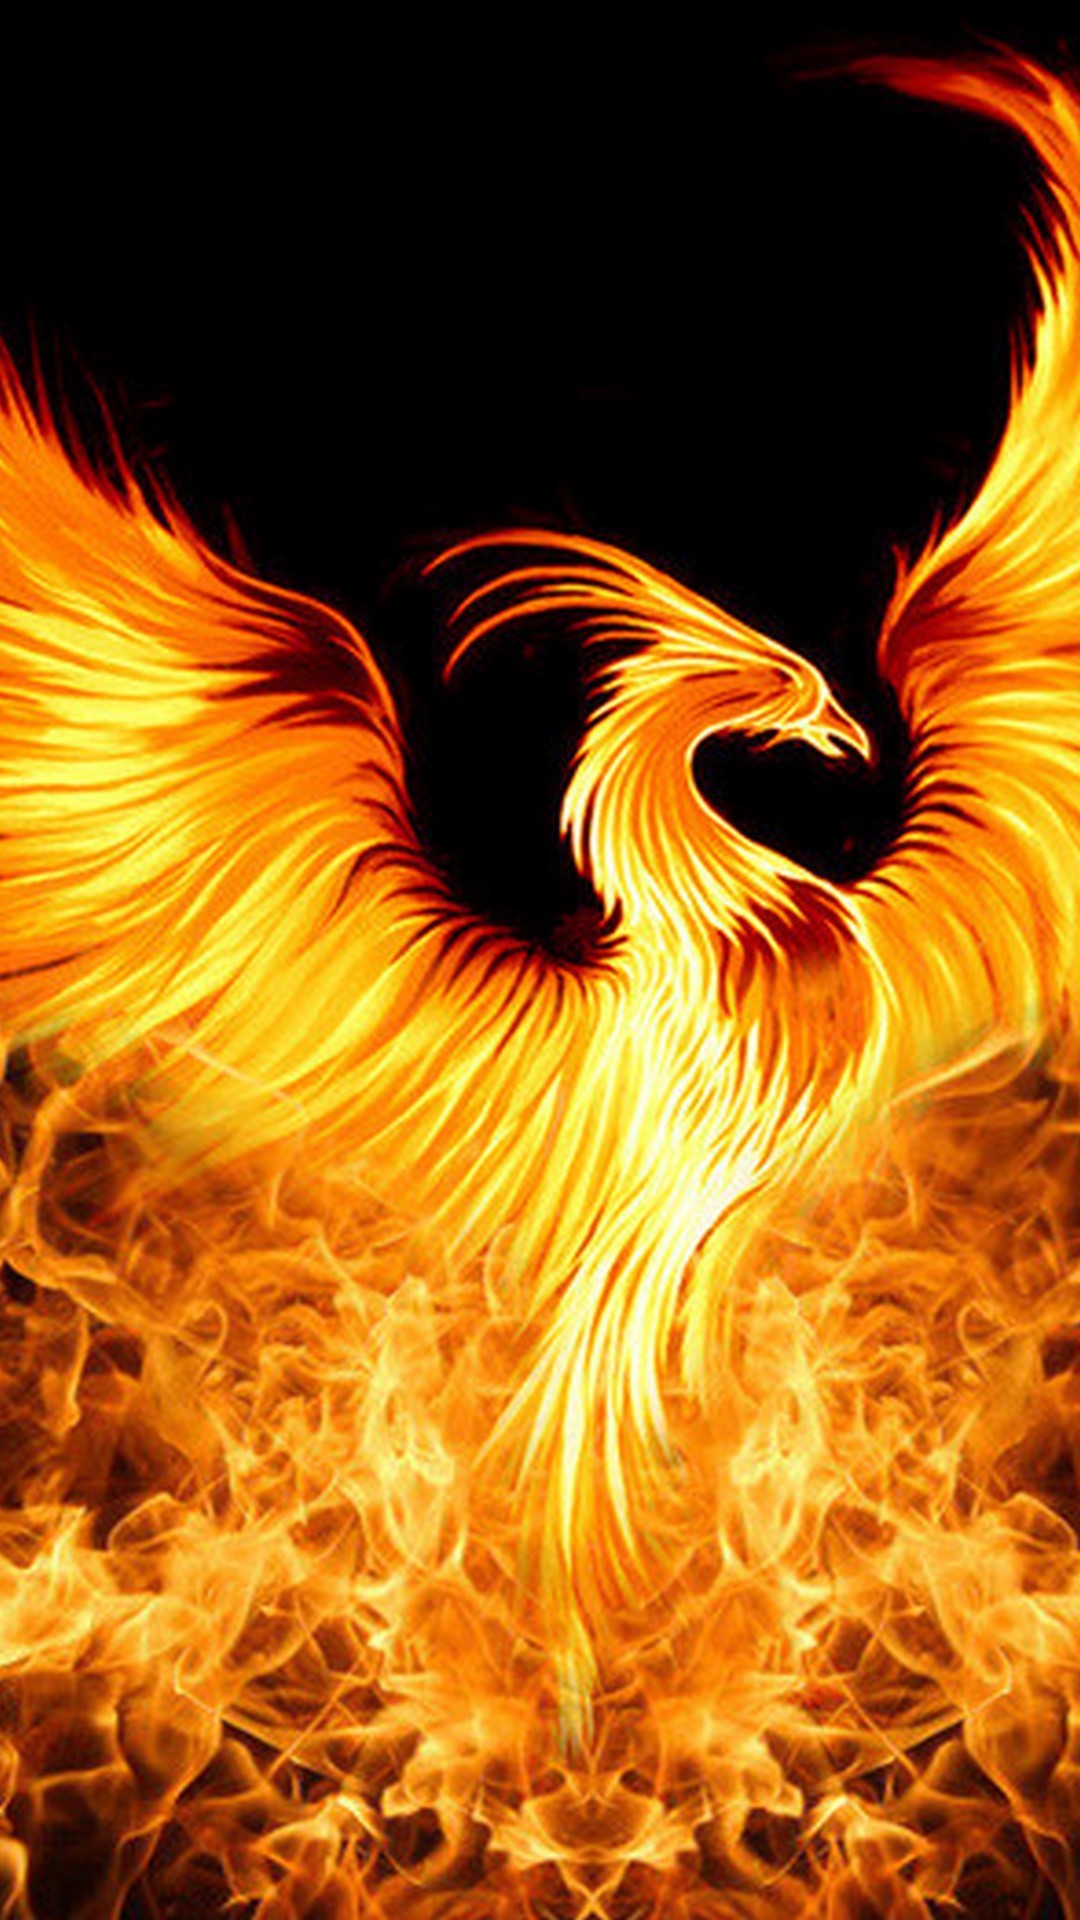 Phoenix Backgrounds For Android with image resolution 1080x1920 pixel. You can make this wallpaper for your Android backgrounds, Tablet, Smartphones Screensavers and Mobile Phone Lock Screen